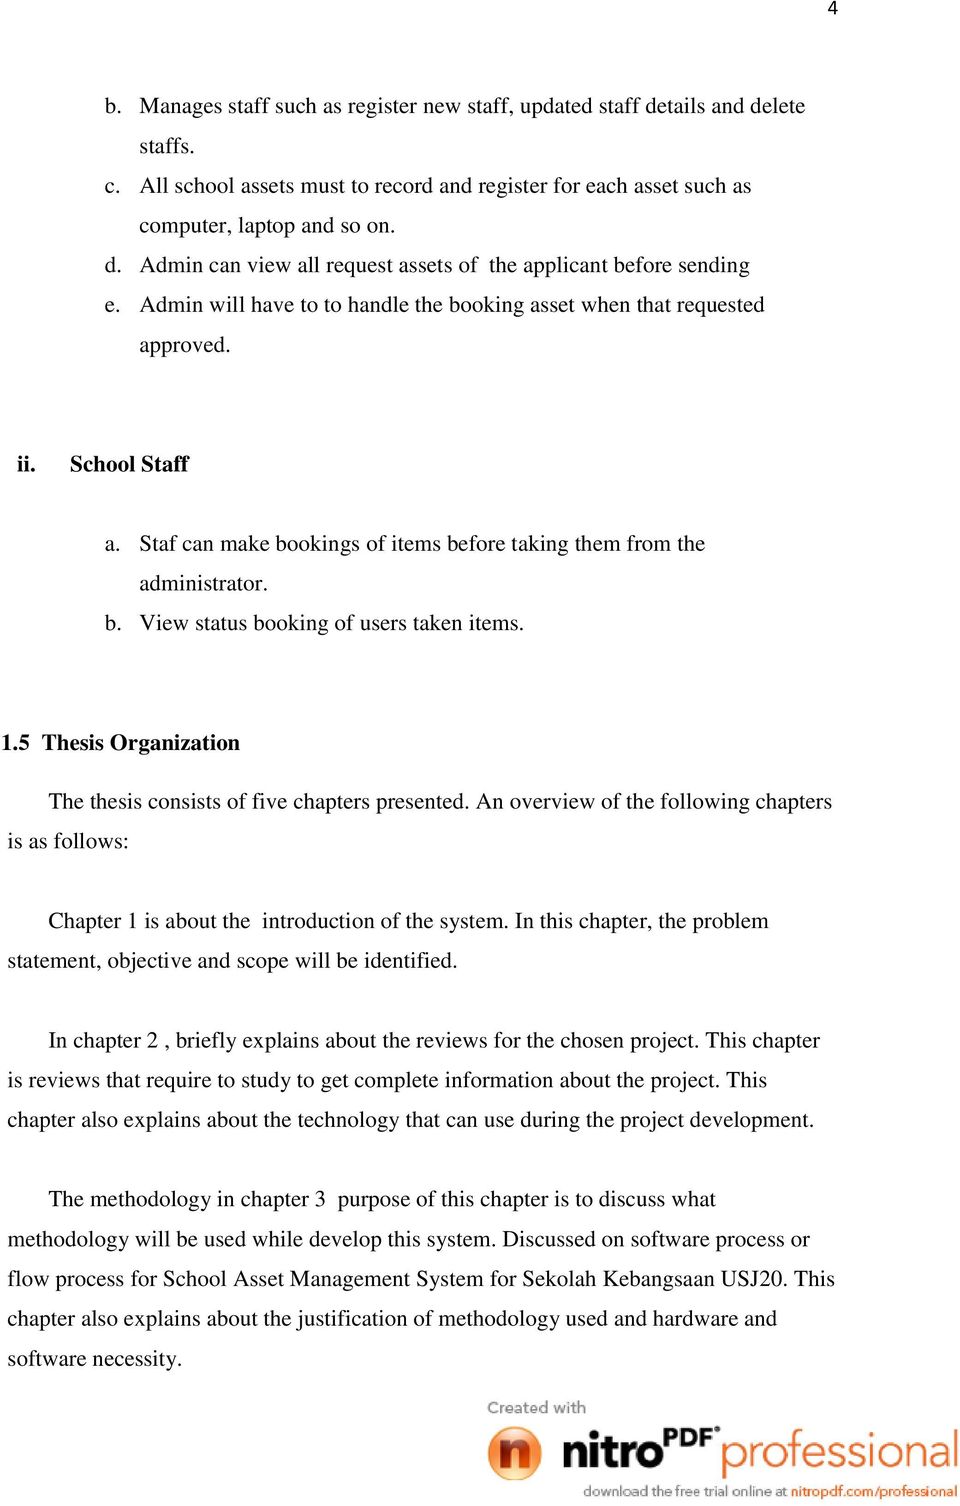 1.5 Thesis Organization The thesis consists of five chapters presented. An overview of the following chapters is as follows: Chapter 1 is about the introduction of the system.